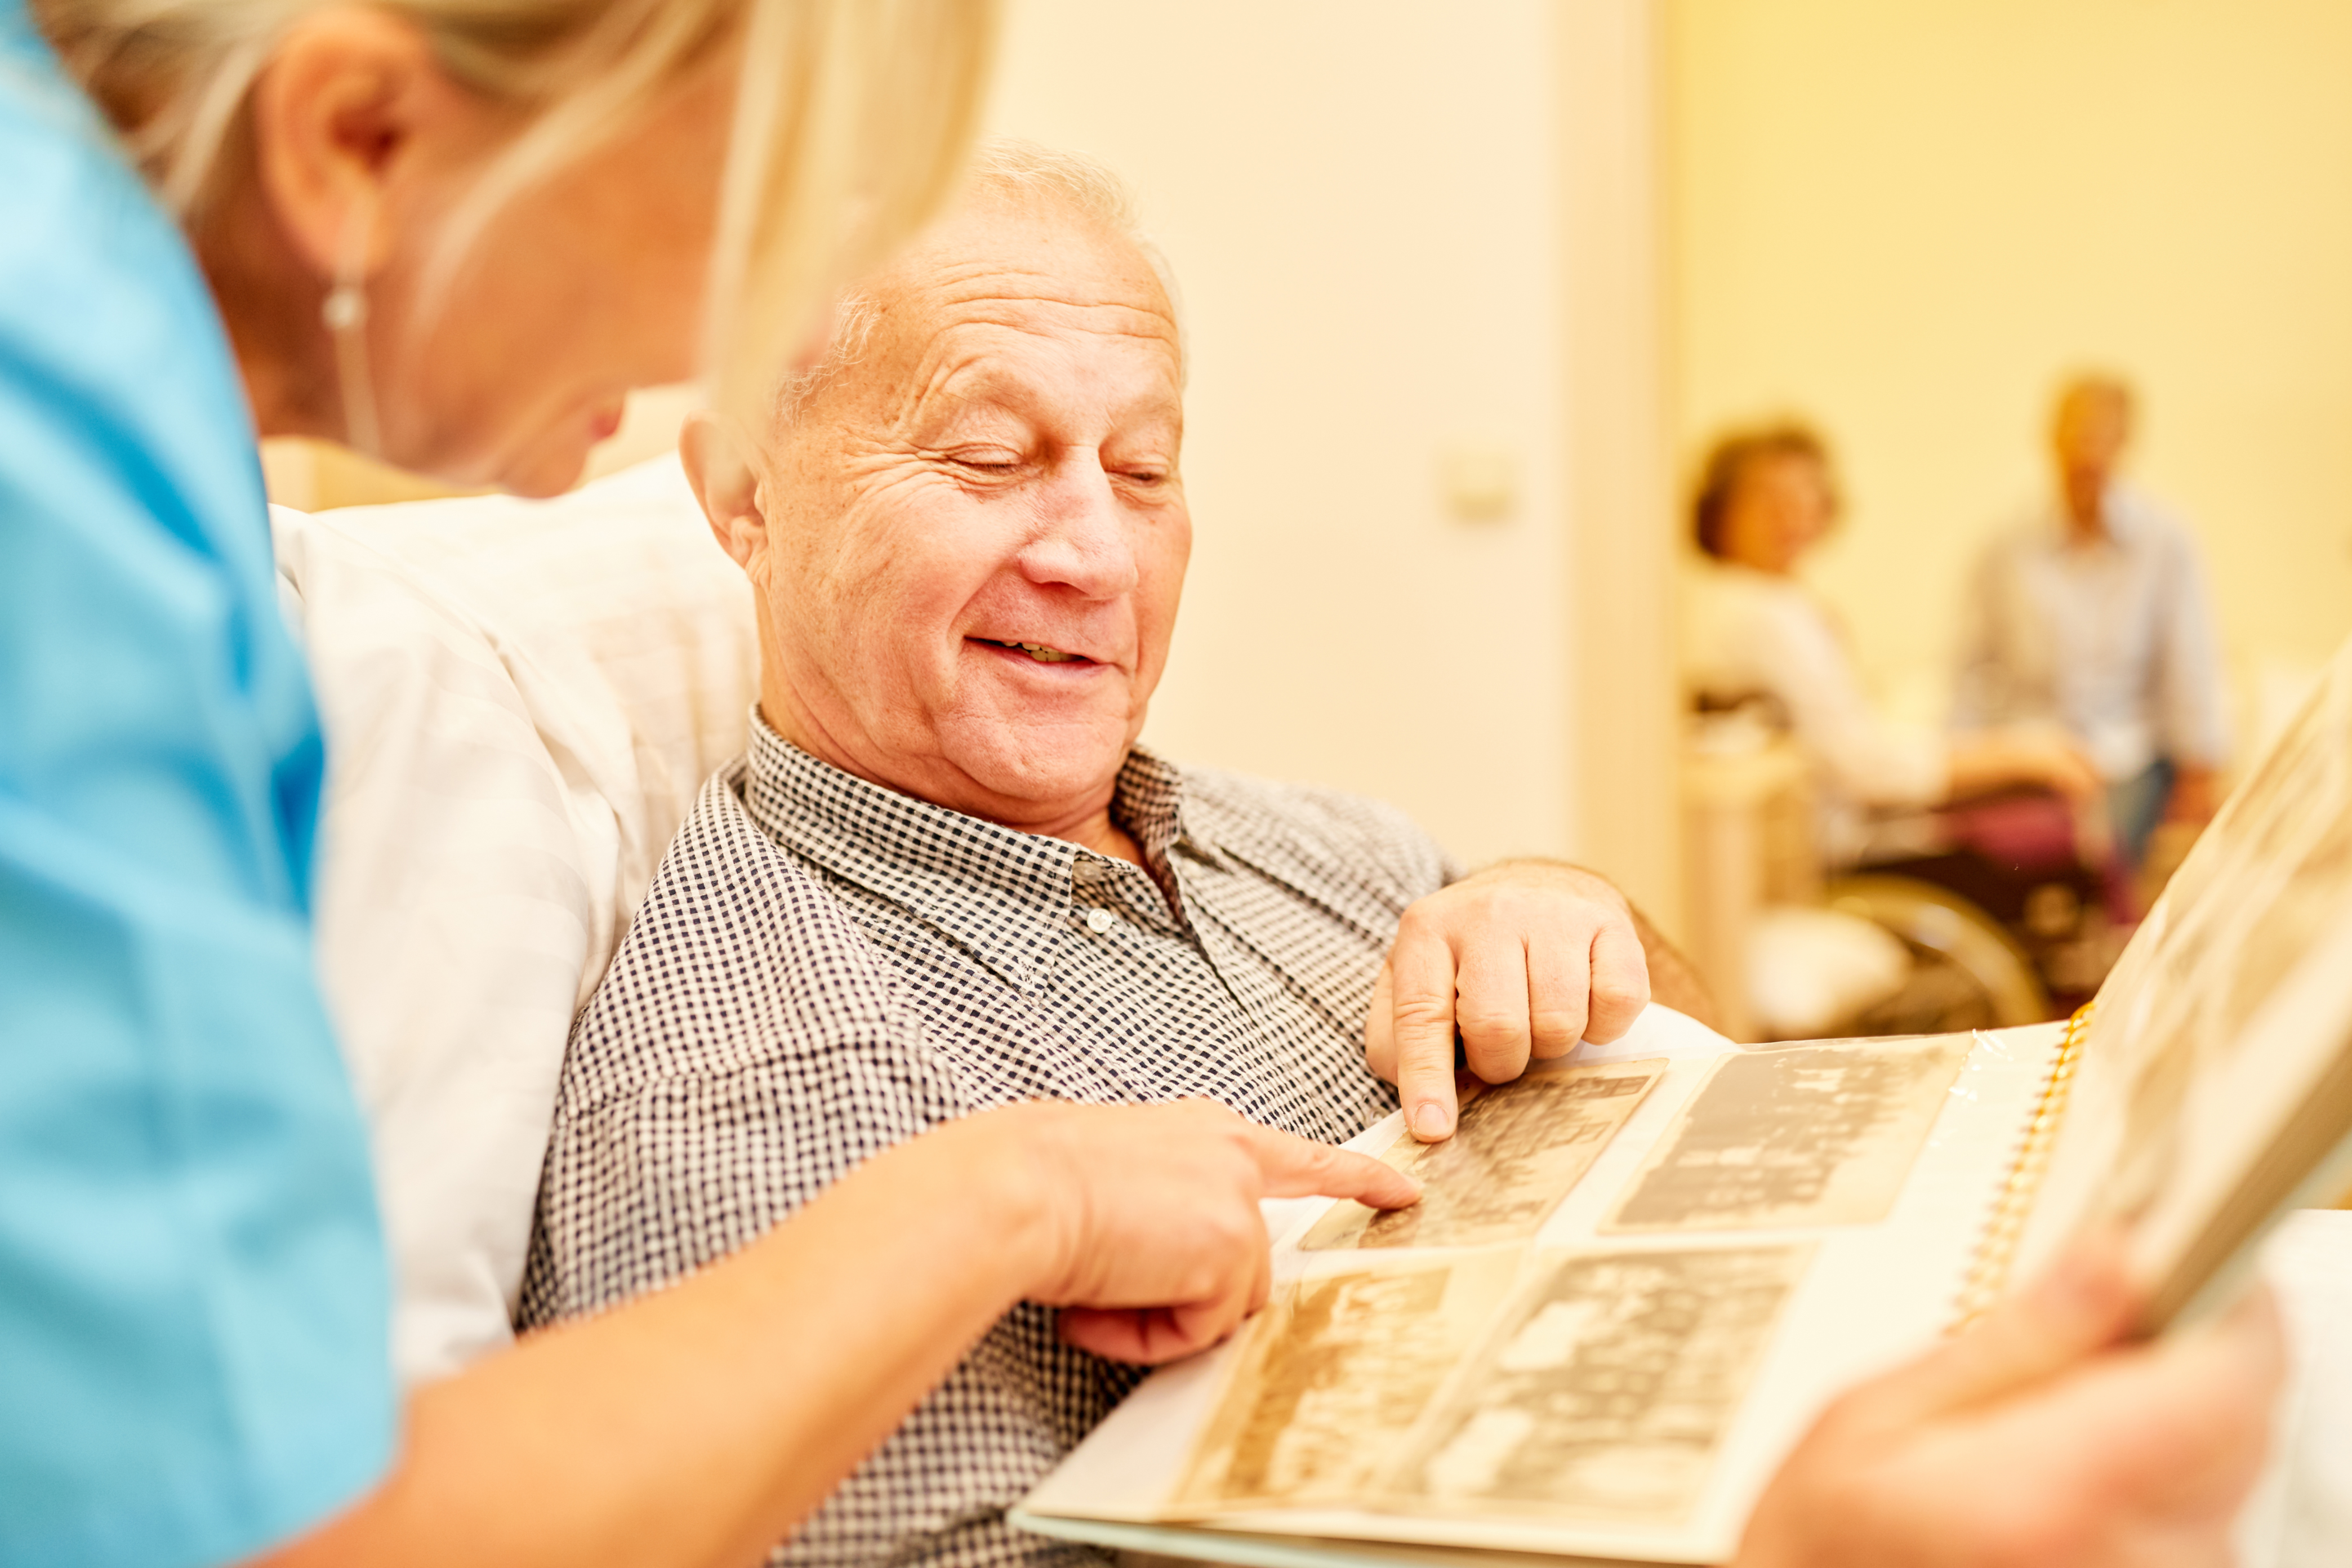 Senior man with Alzheimer's disease looks at photo album in bed.